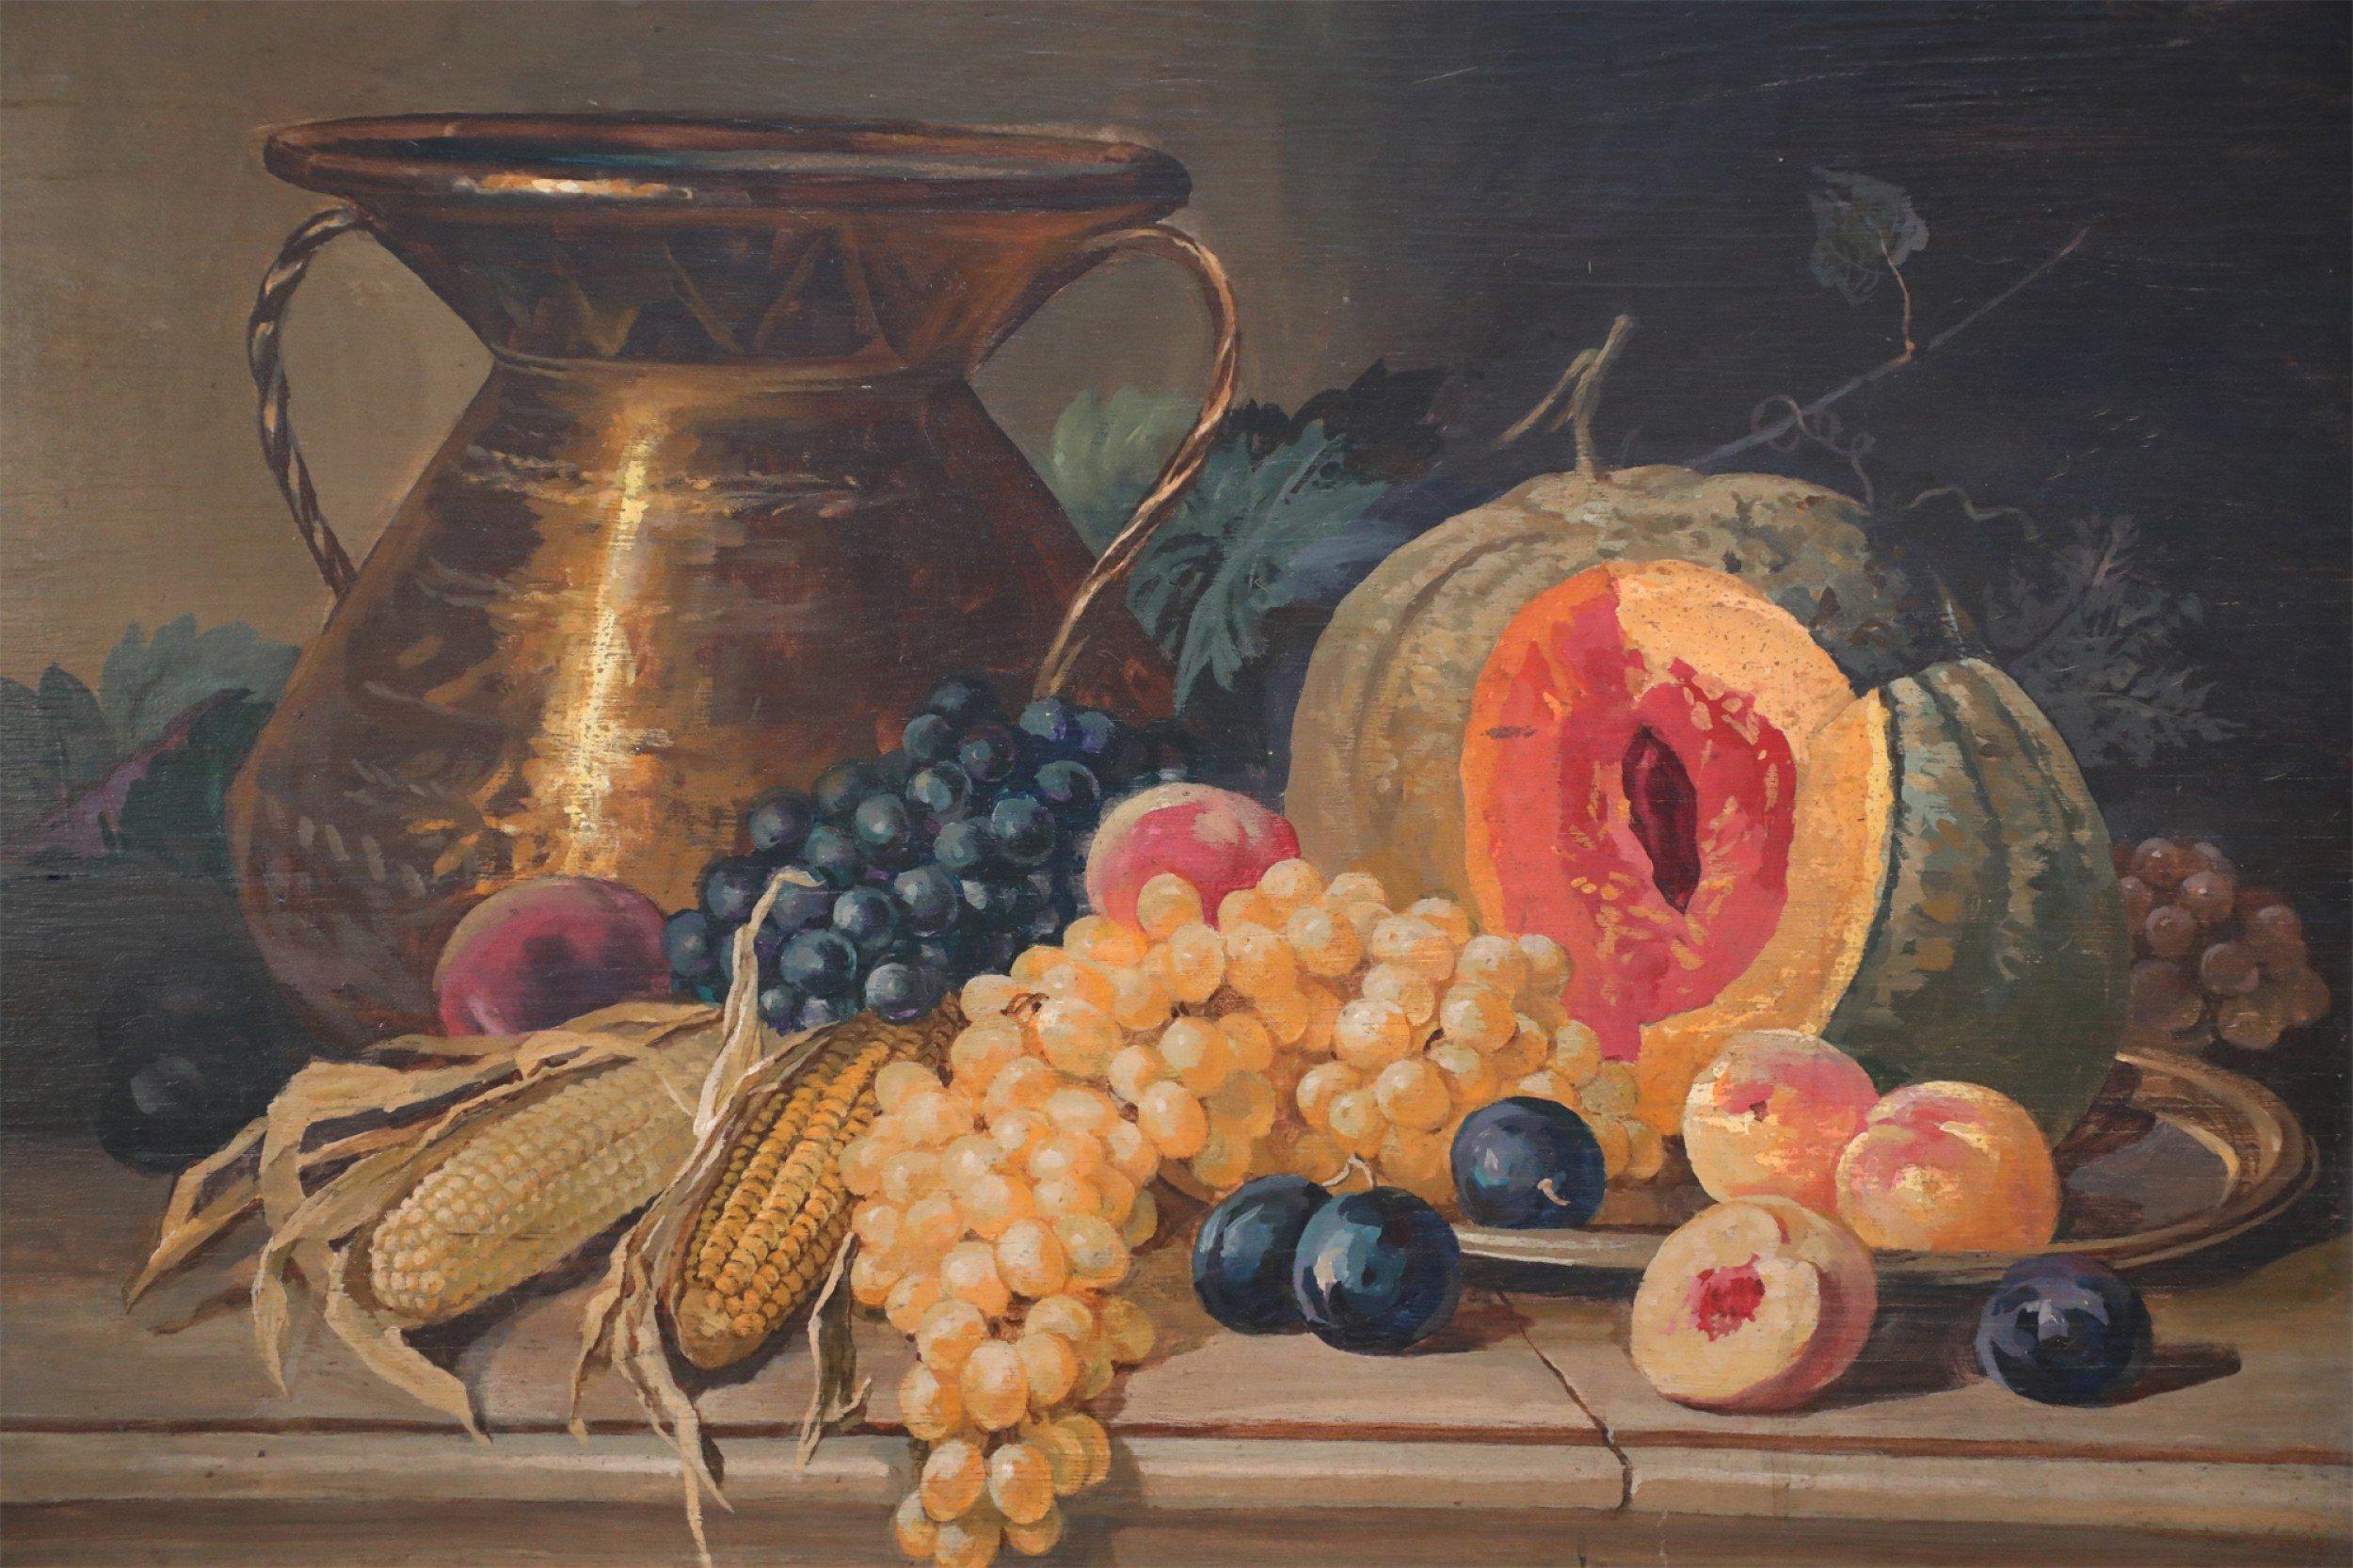 American Fruits, Vegetables, and Gold Urn Still Life Painting on Wood For Sale